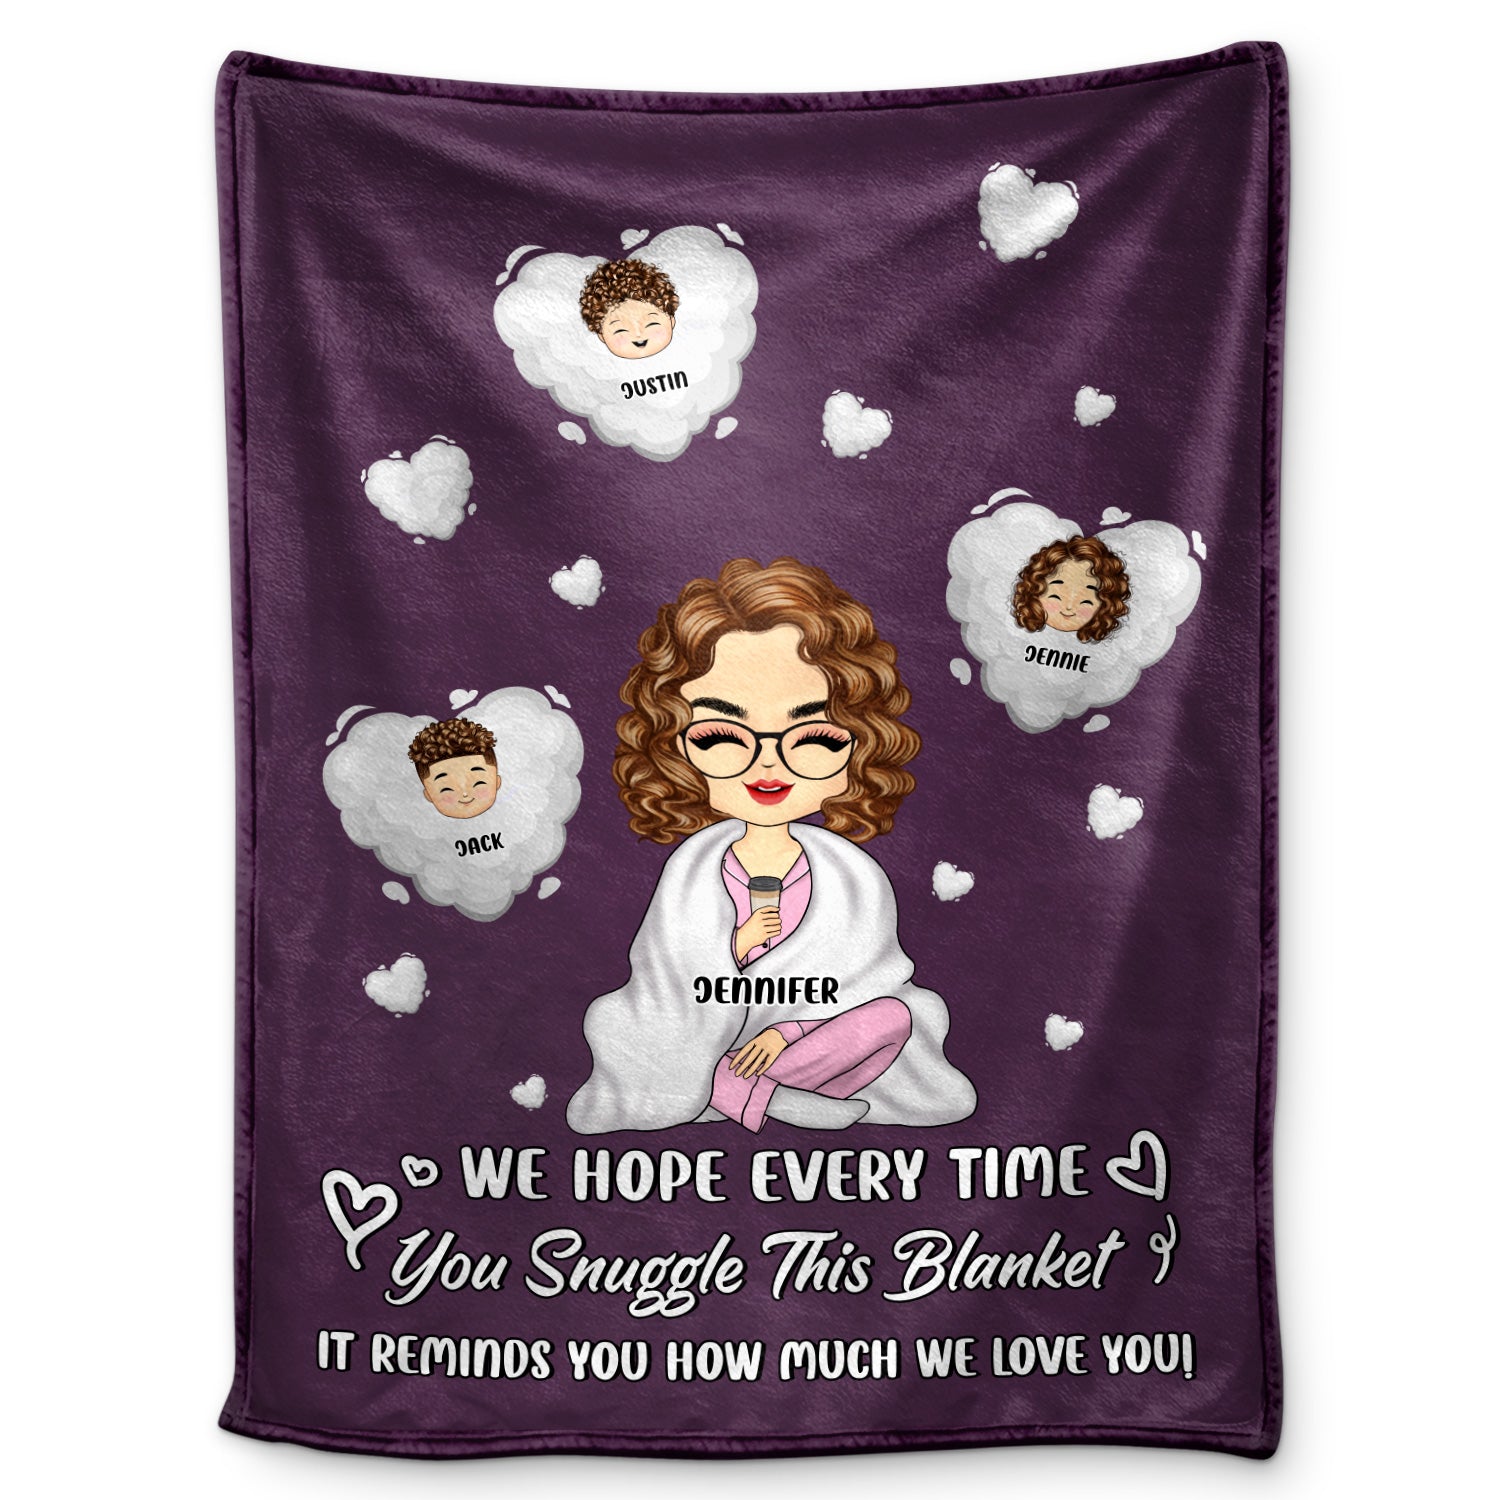 How Much We Love You - Gift For Mother - Personalized Custom Fleece Blanket